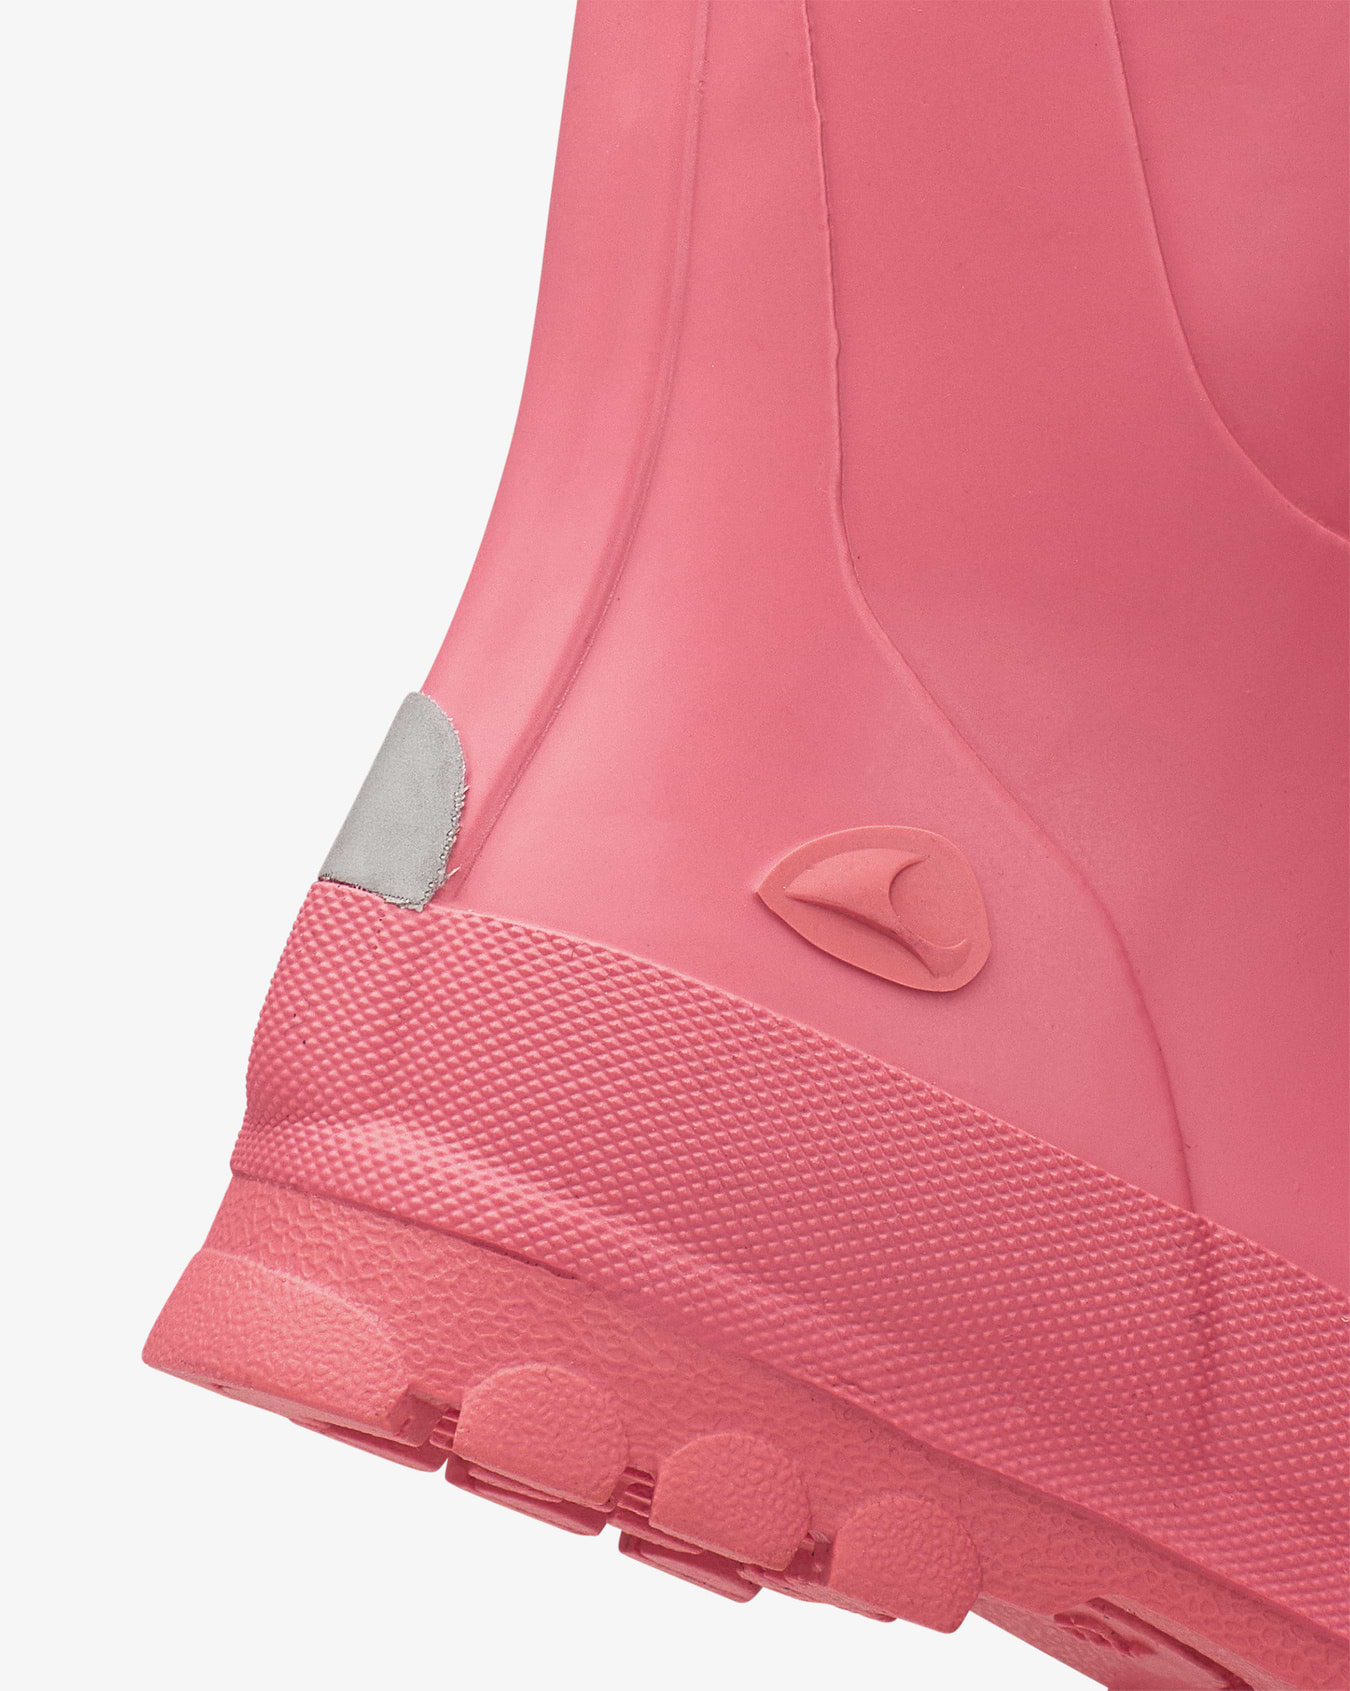 Jolly Pink/Pink Rubber Boot